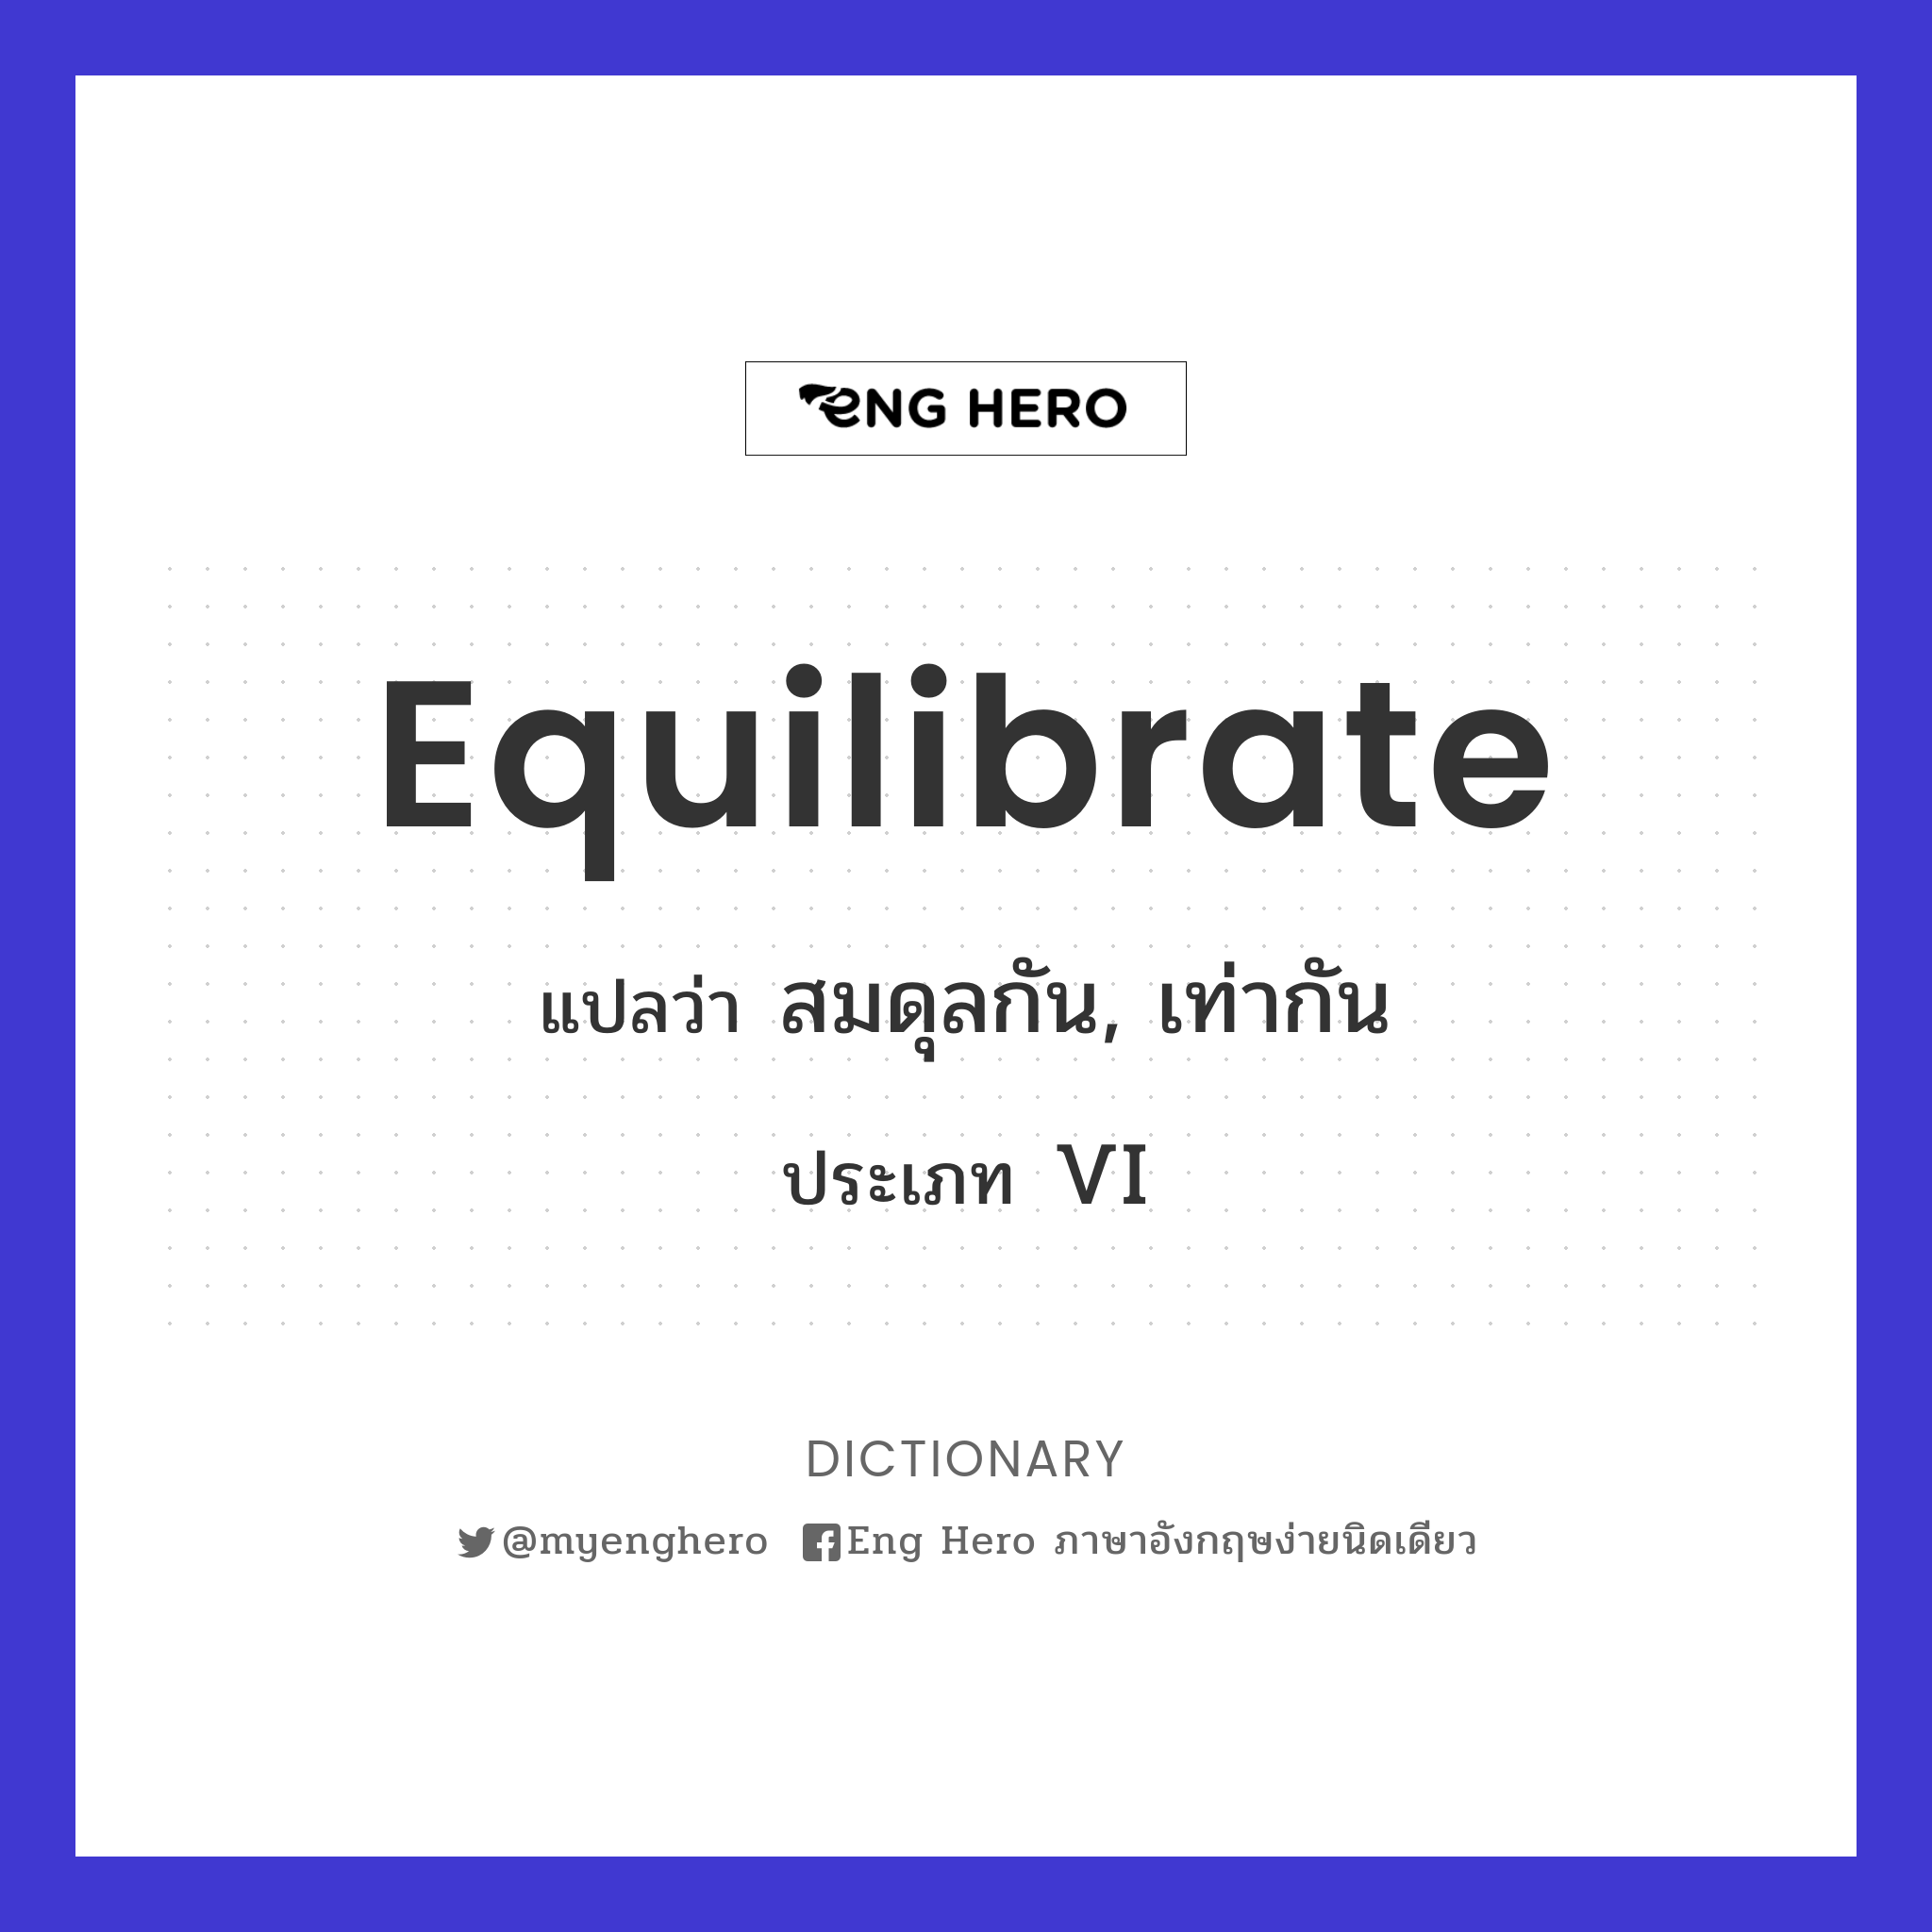 equilibrate